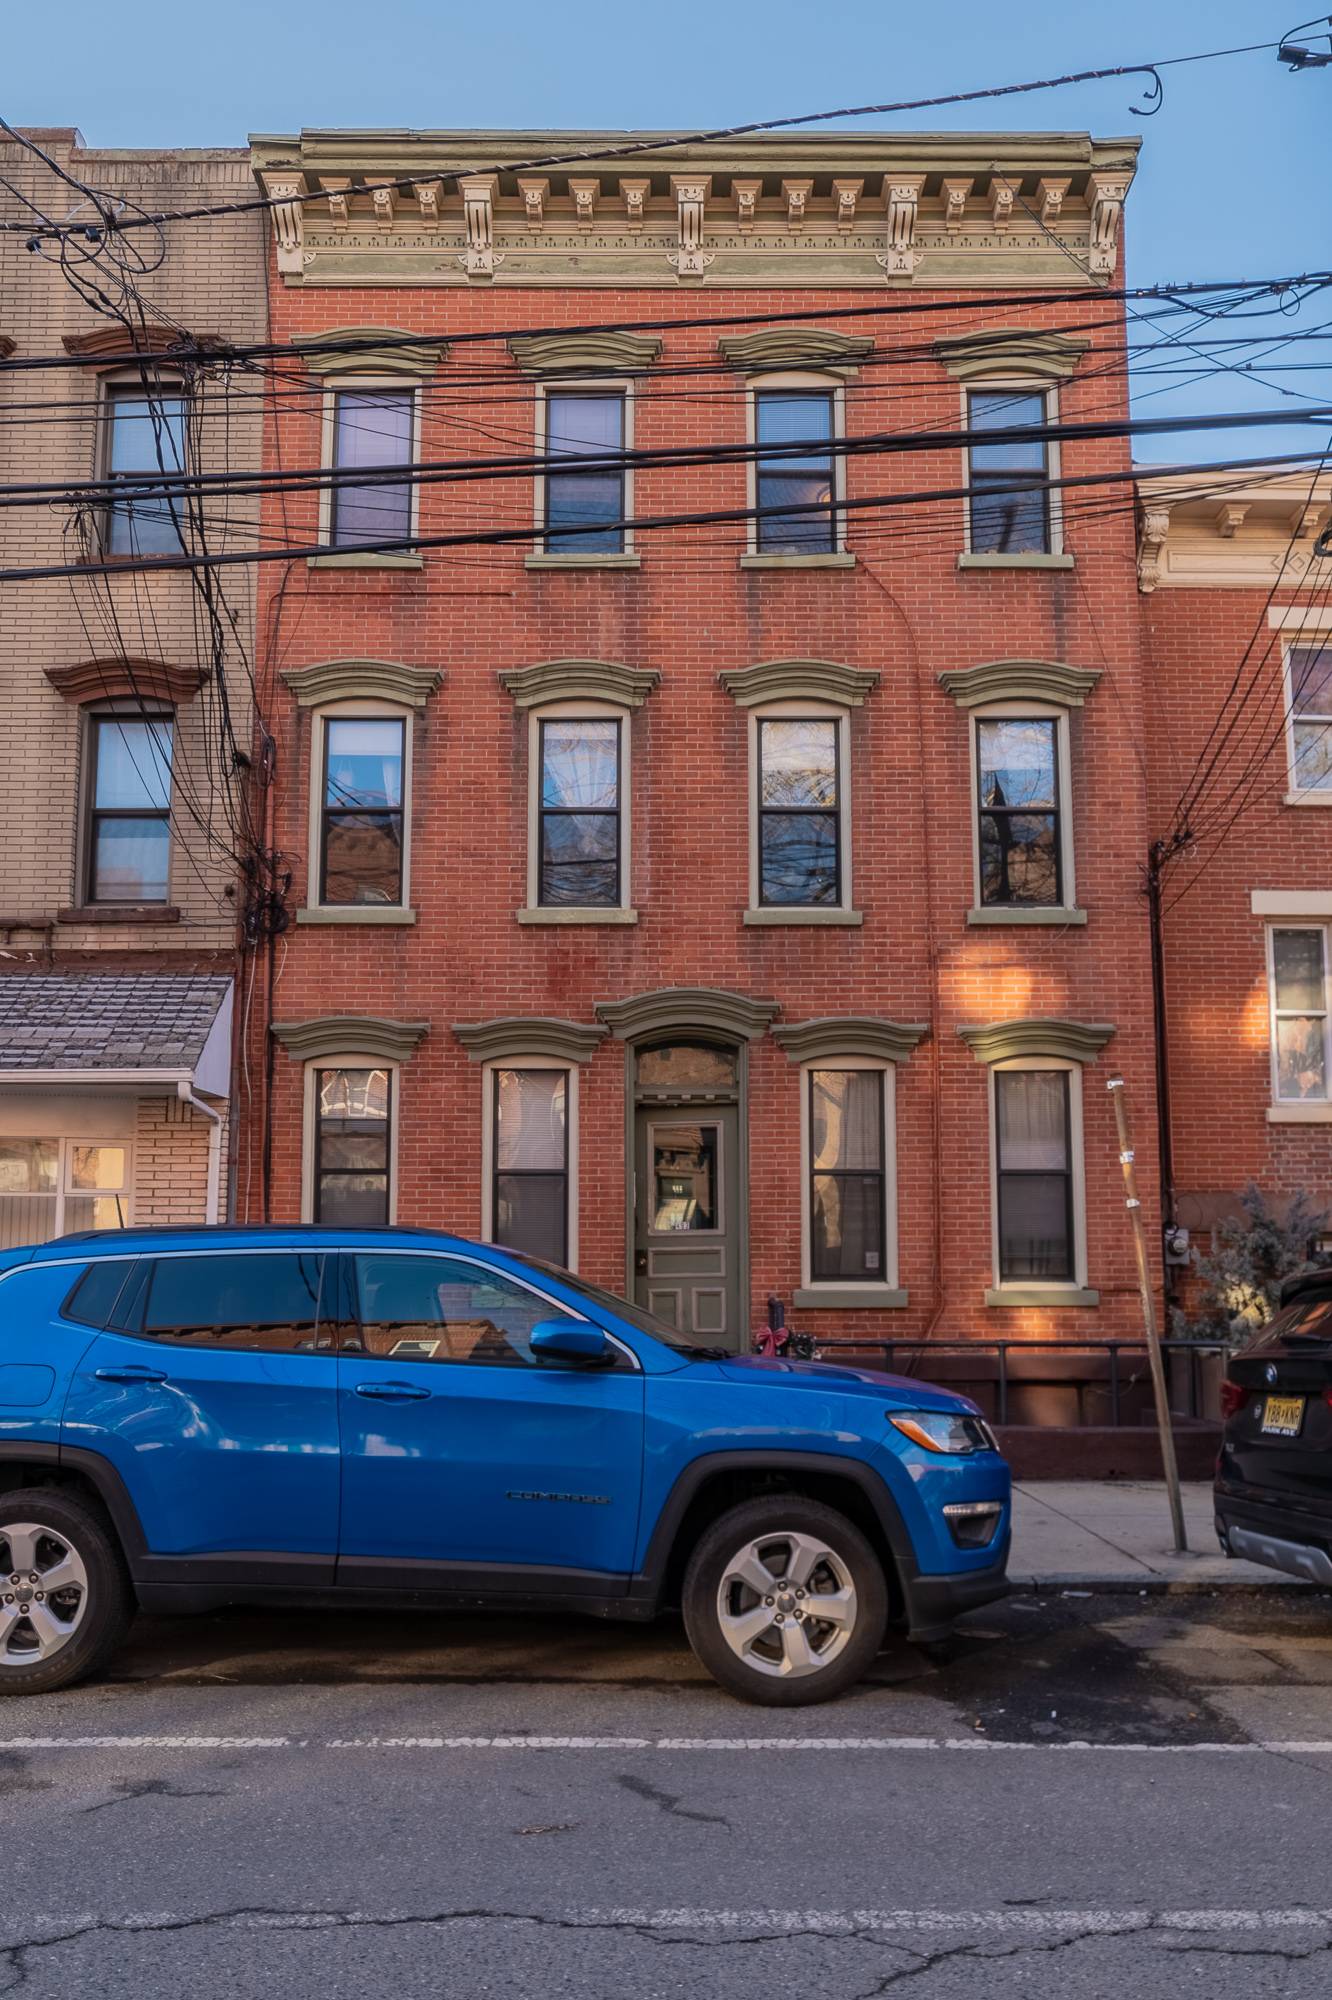 6 Unit Investment Property in Jersey City!